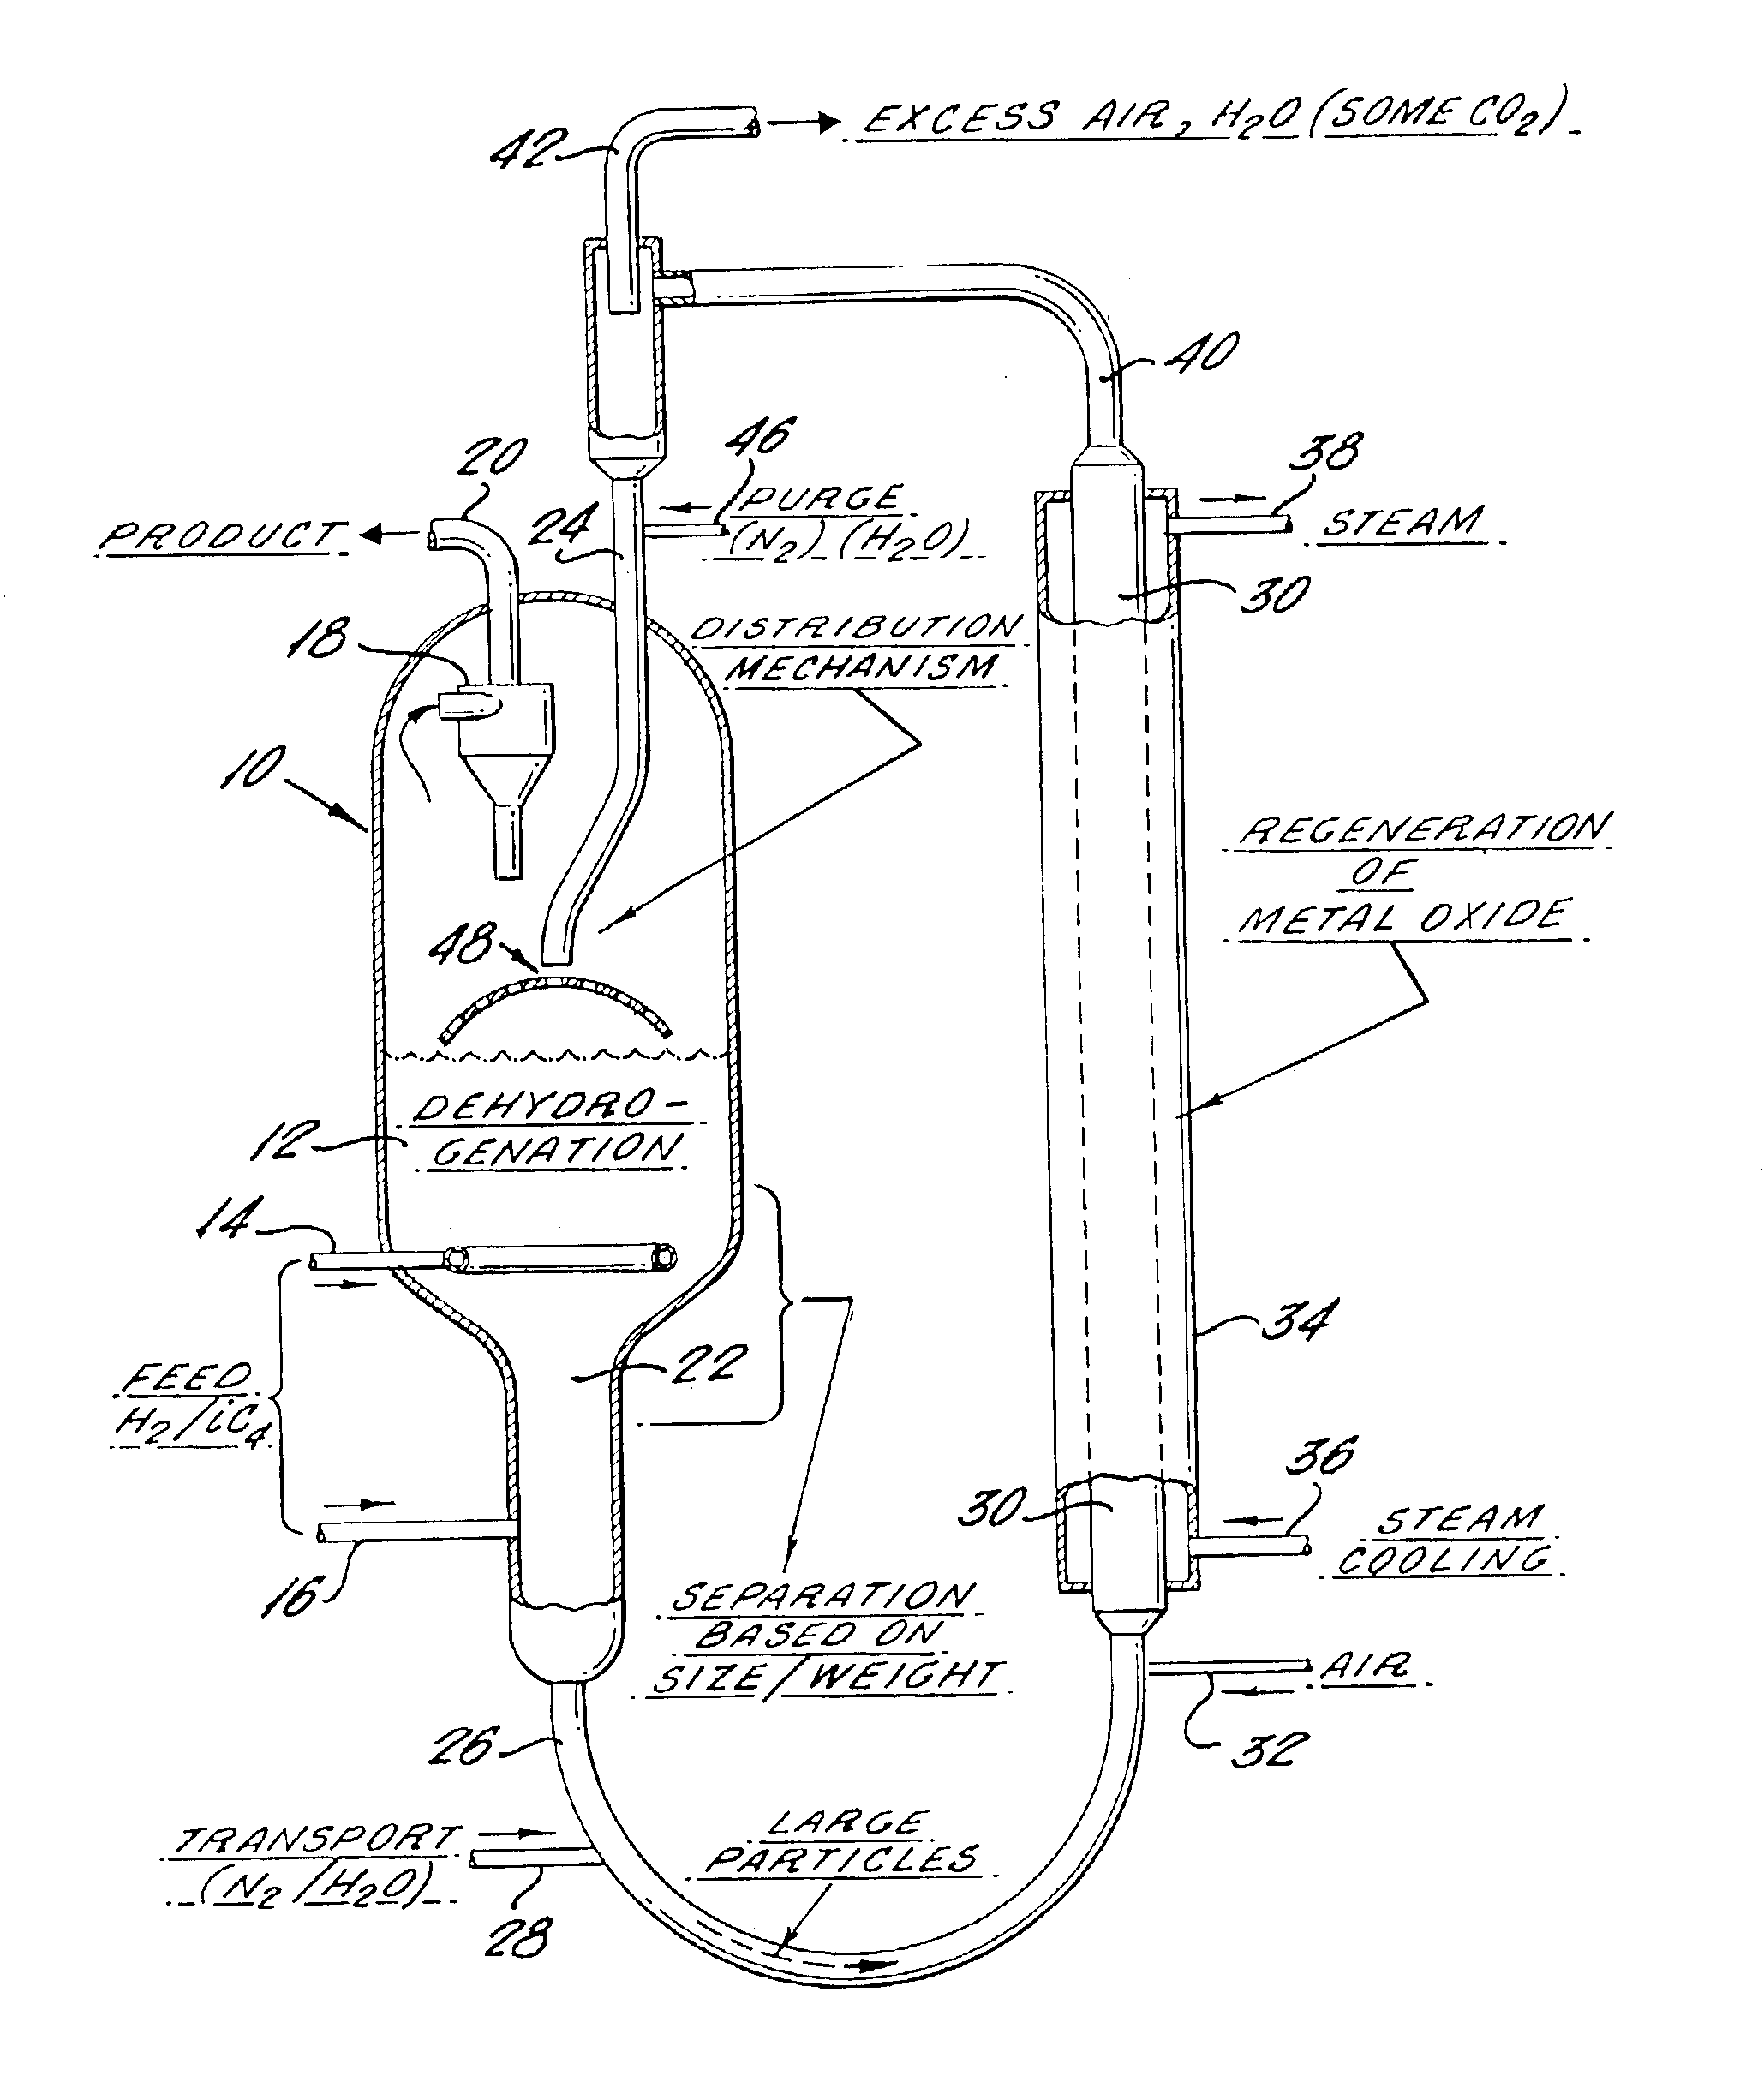 Apparatus for endothermic reactions of organic compounds